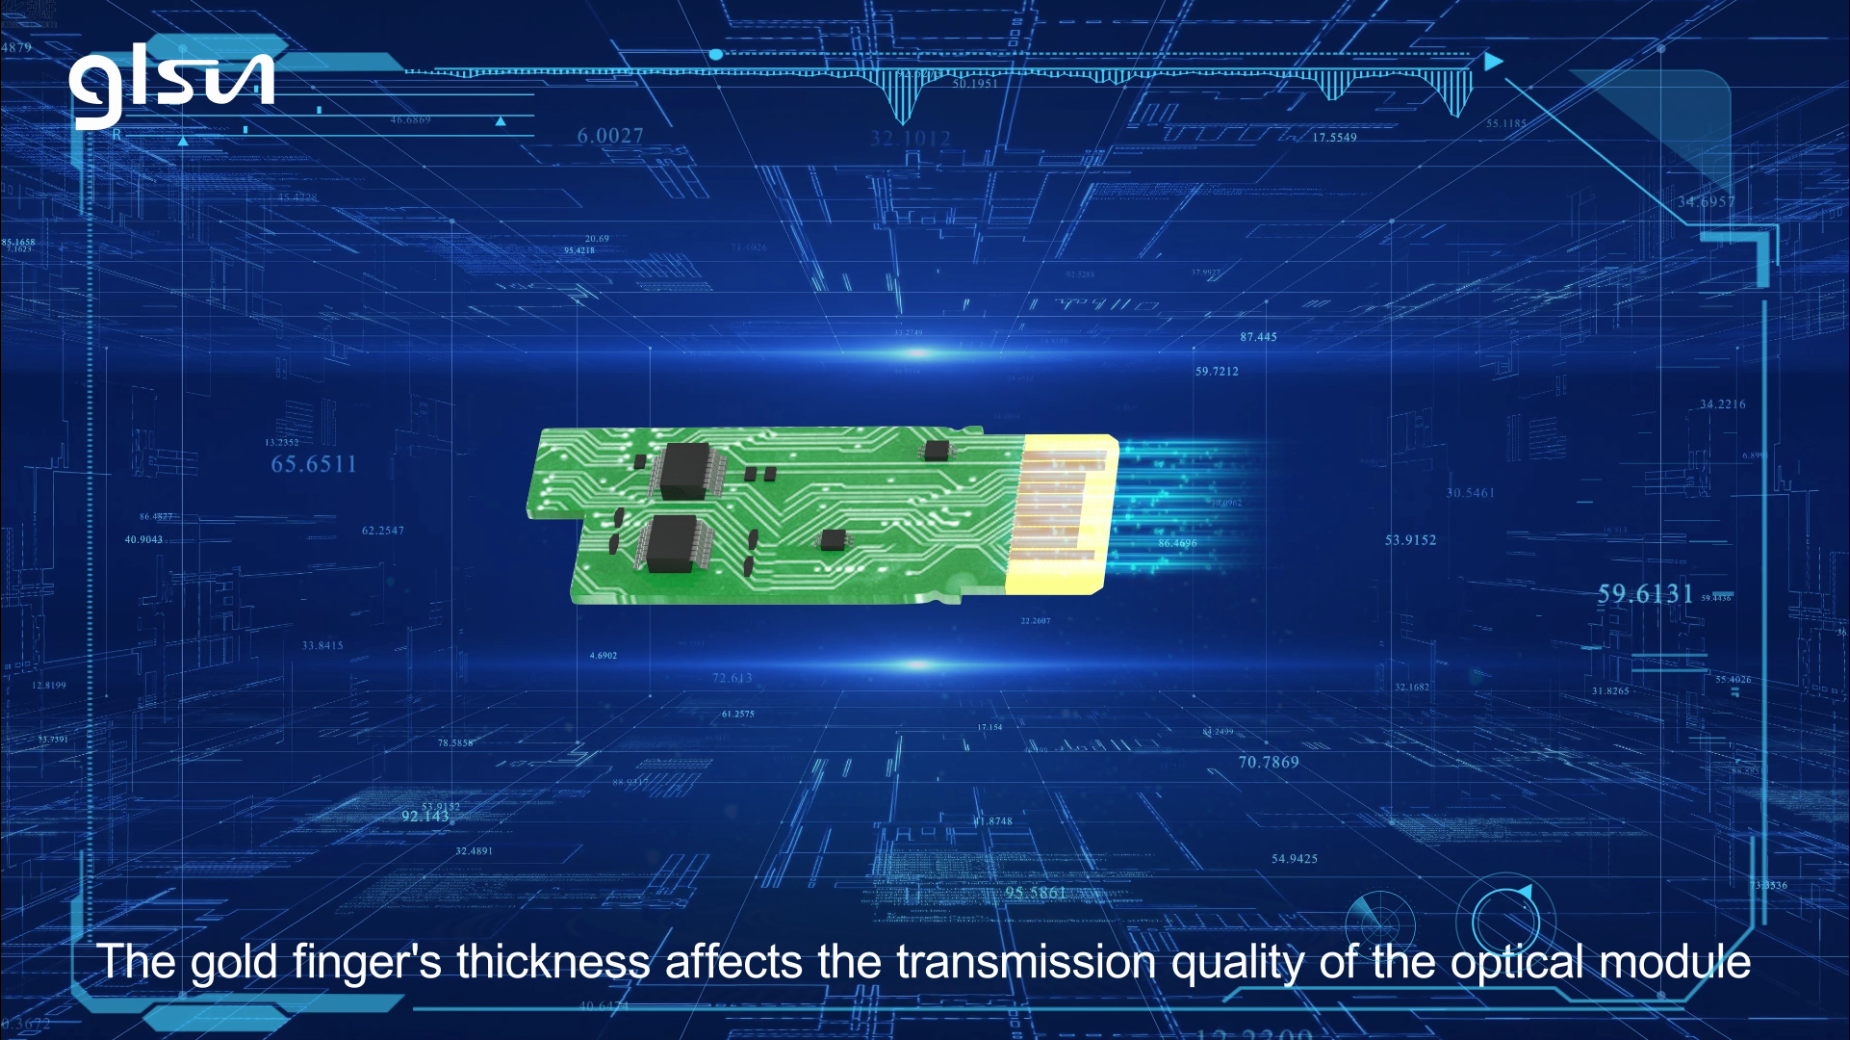 Is the gold finger of an optical transceiver really made of gold?